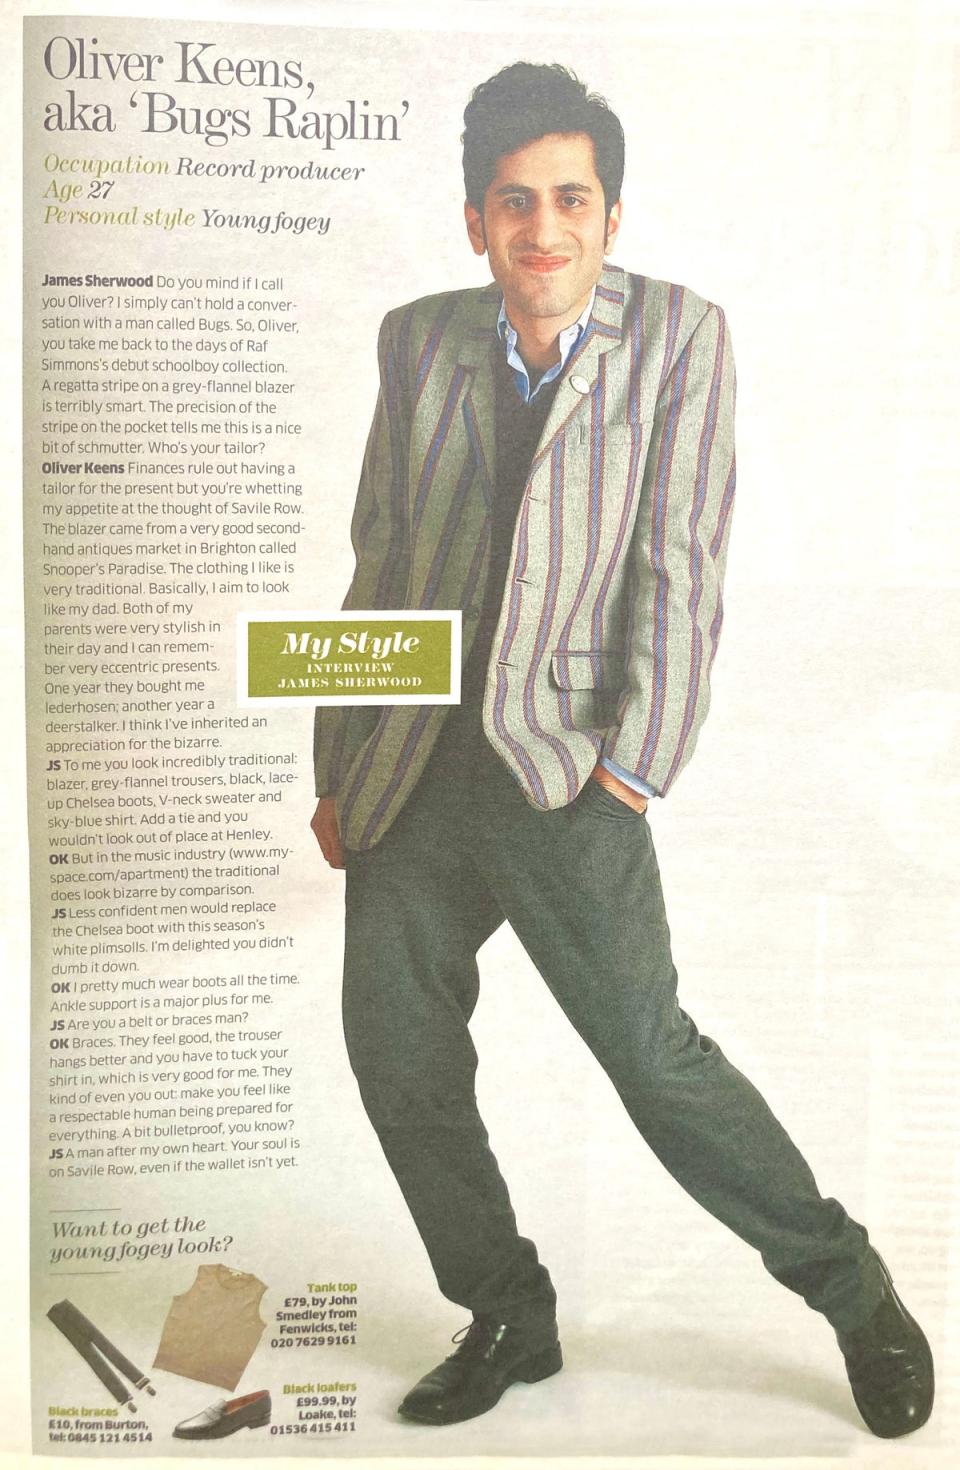 Introducing ‘The Young Fogey’: Oliver Keens in a 2007 edition of ‘The Independent’ (The Independent)